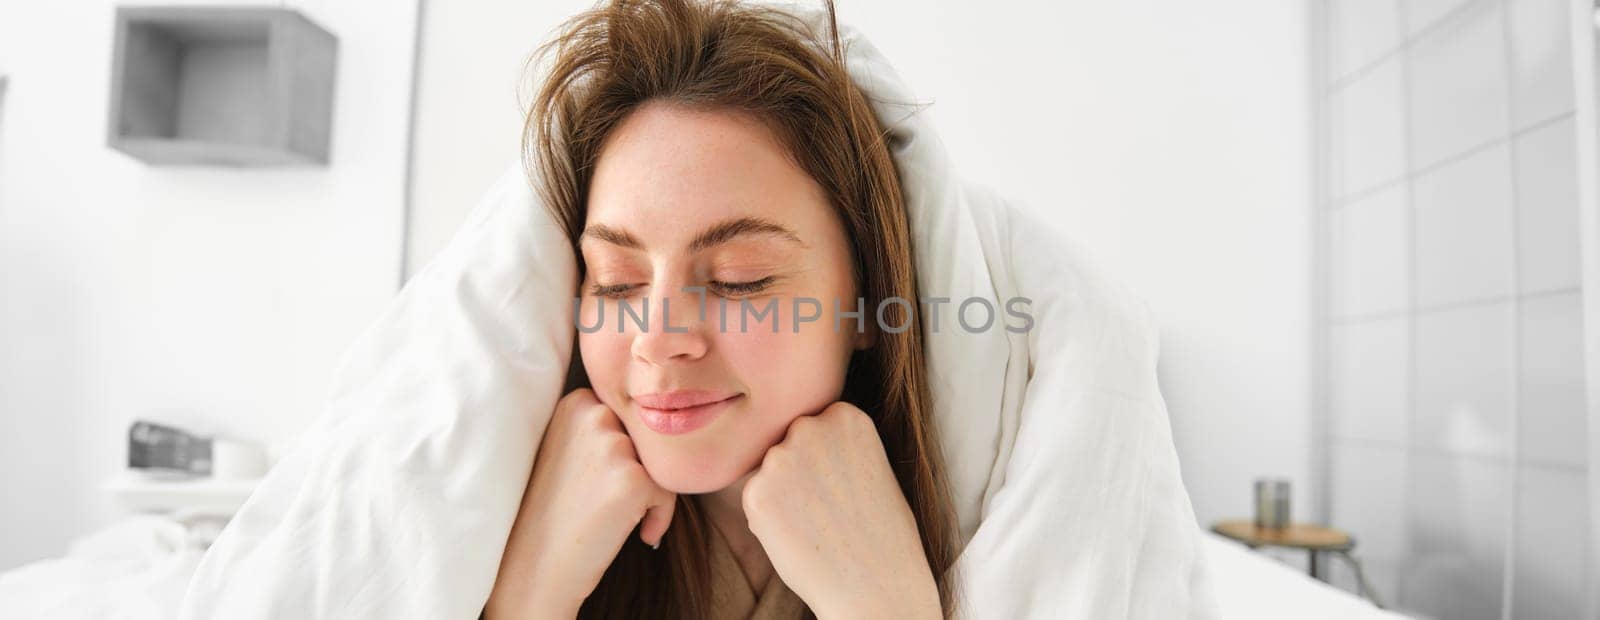 Cheerful woman feeling comfortable in bed, lying in bedroom covered in white sheets, smiling pleased, has messy hair in morning, waking up and looking happy.